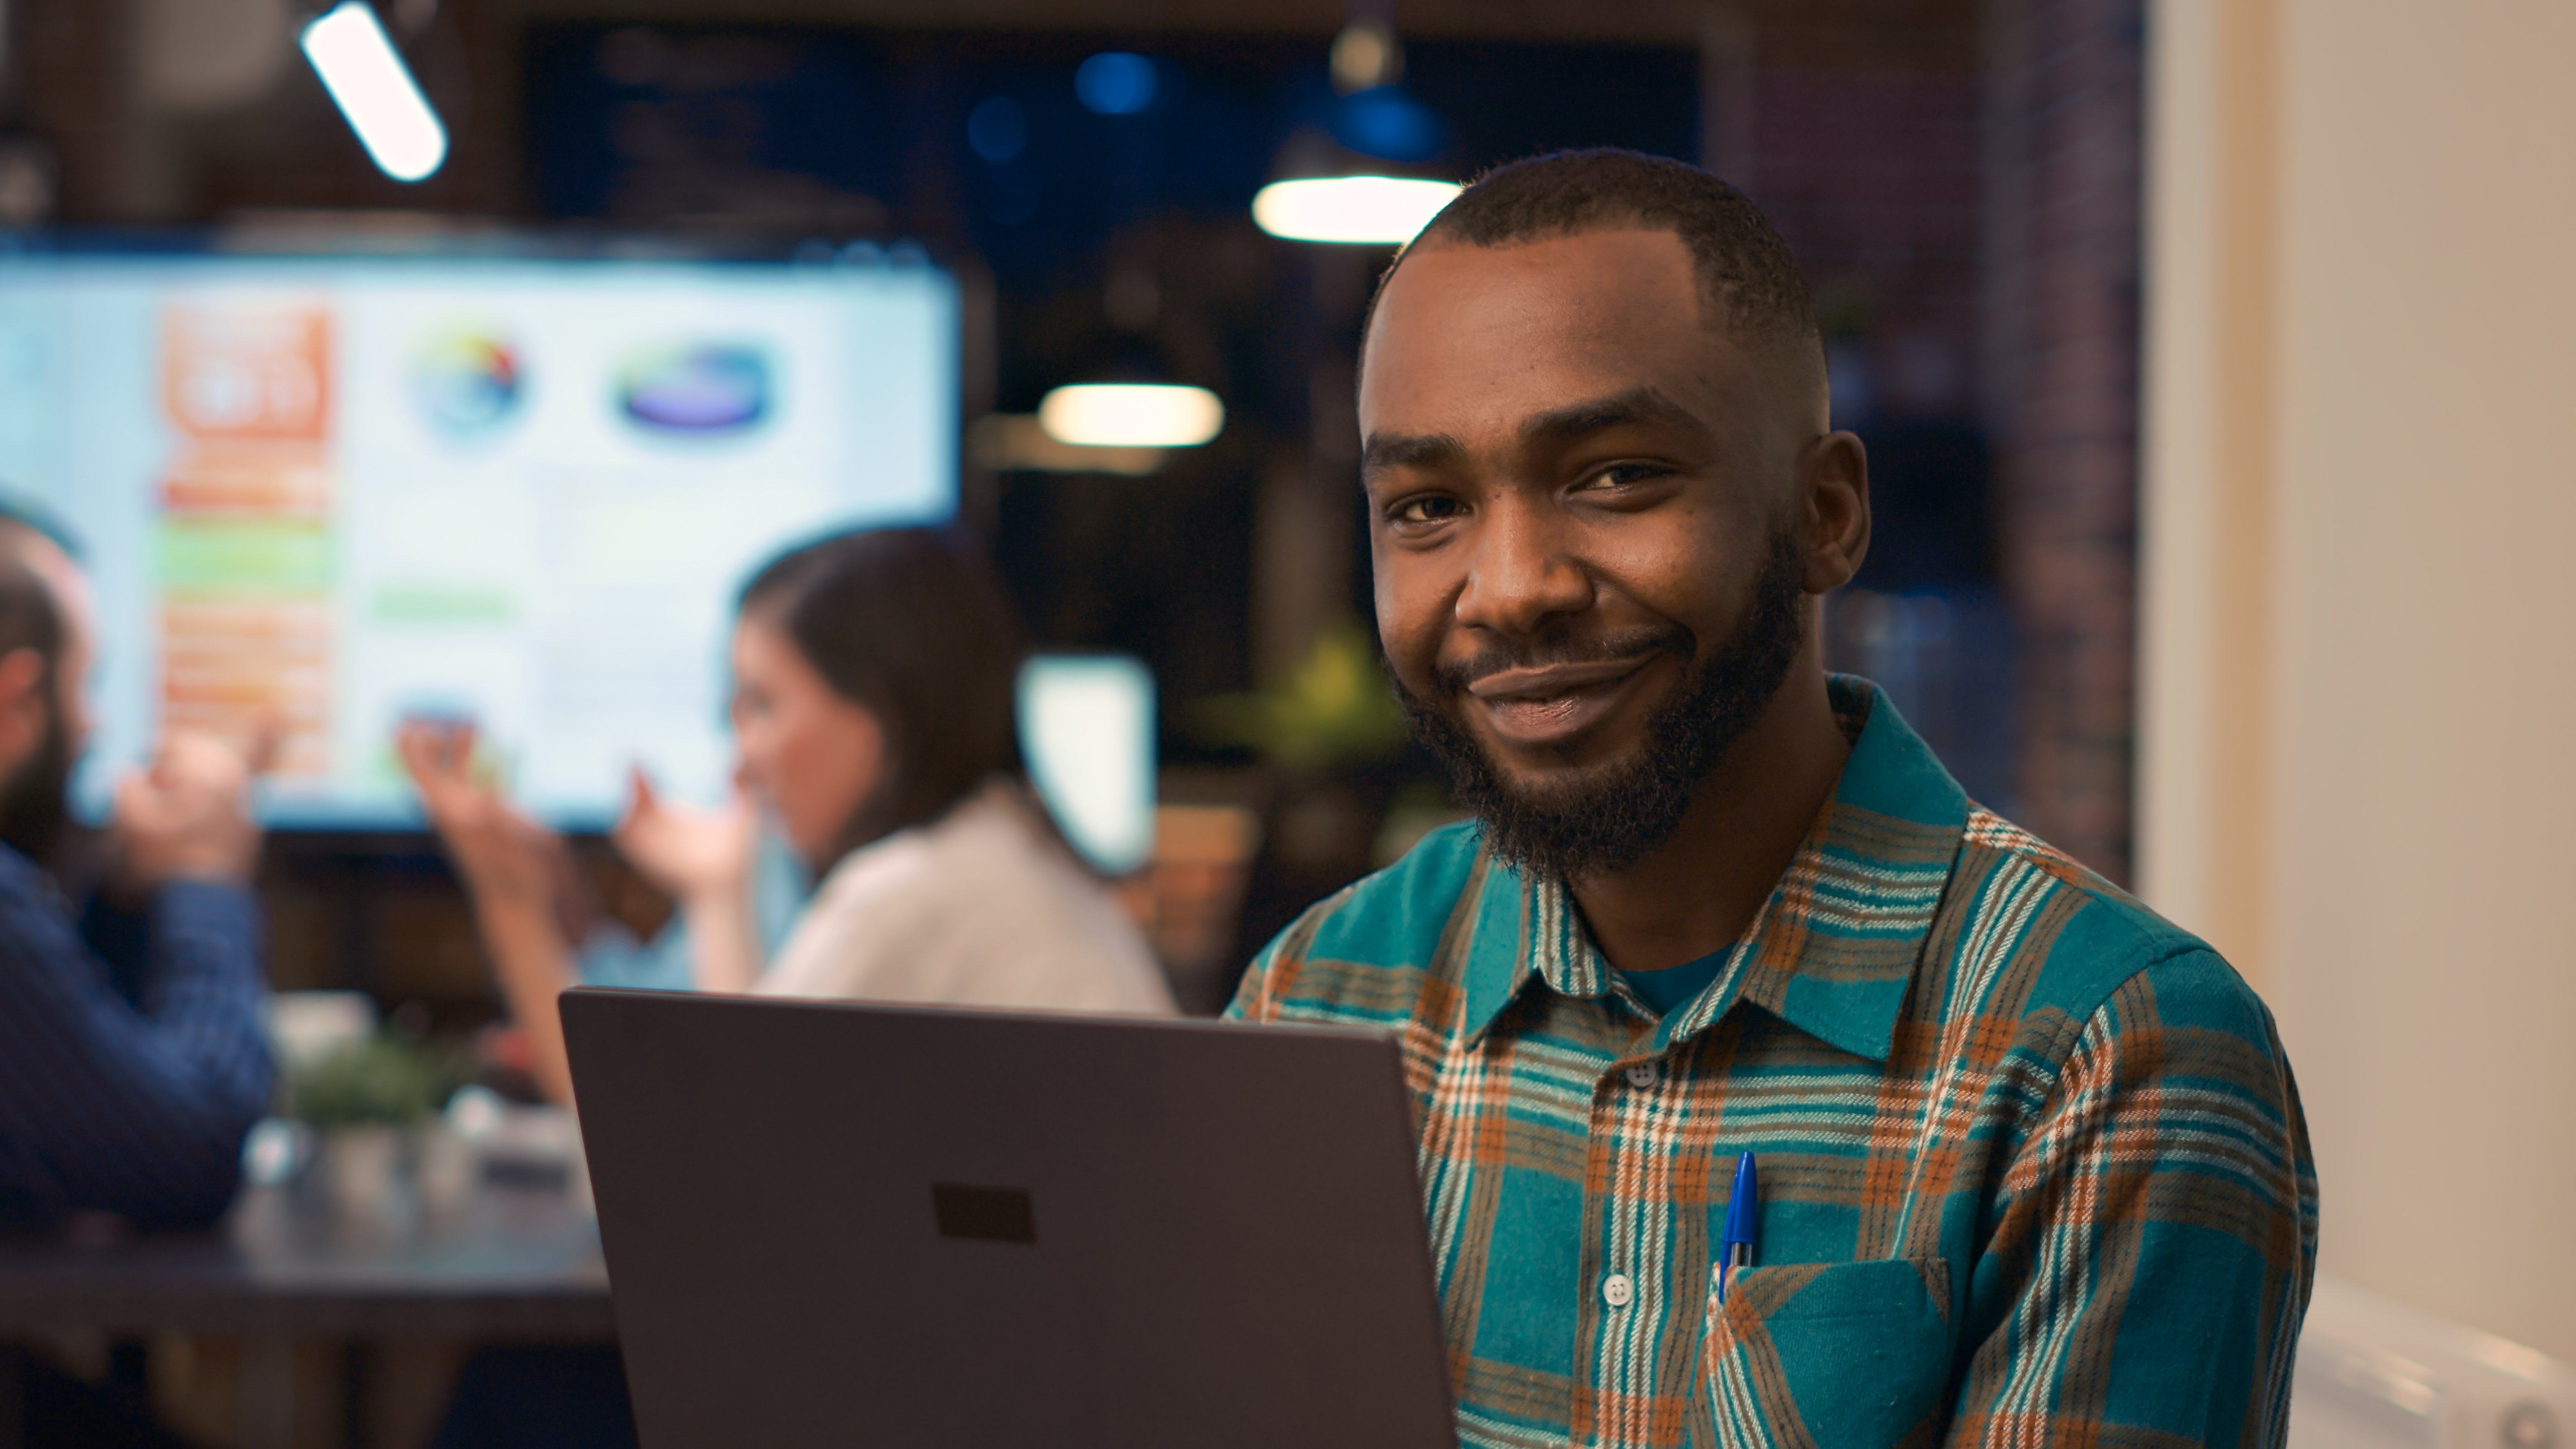 smiling-african-american-office-employee-working-laptop-portrait-young-man-holding-computer-looking-camera-close-up-company-financial-presentation-business-meeting-background-handheld-shot